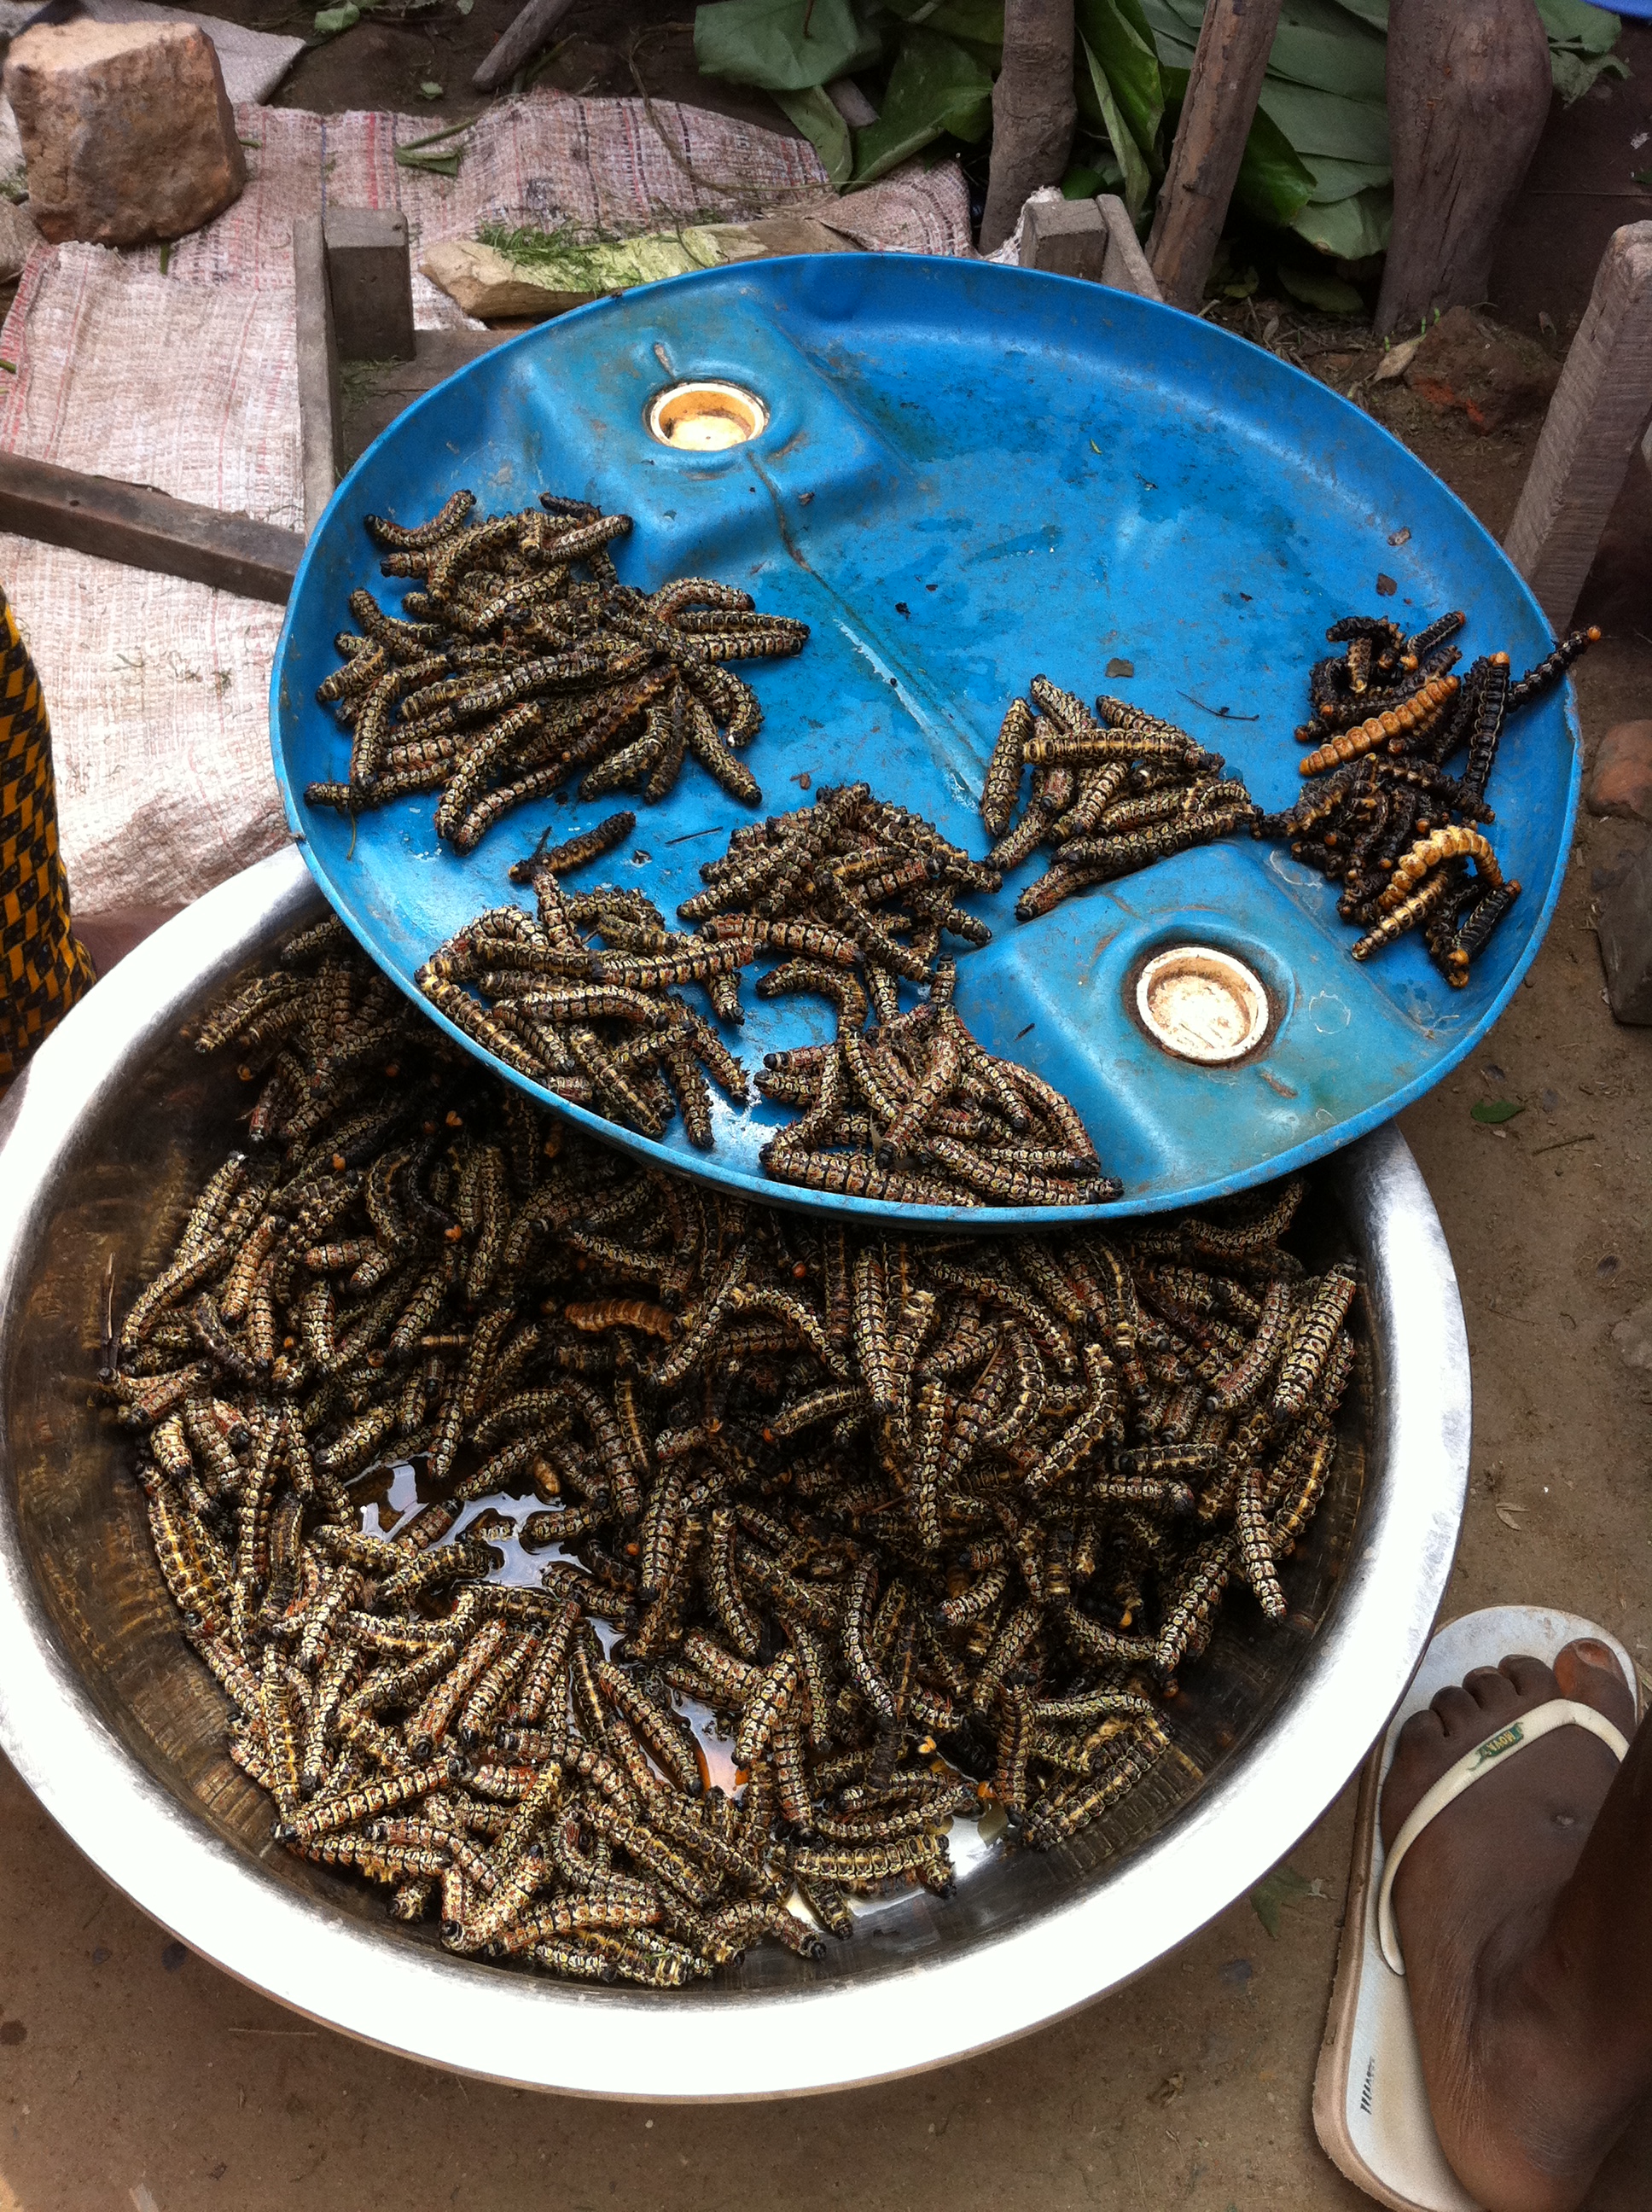 Caterpillars for sale at the meat market